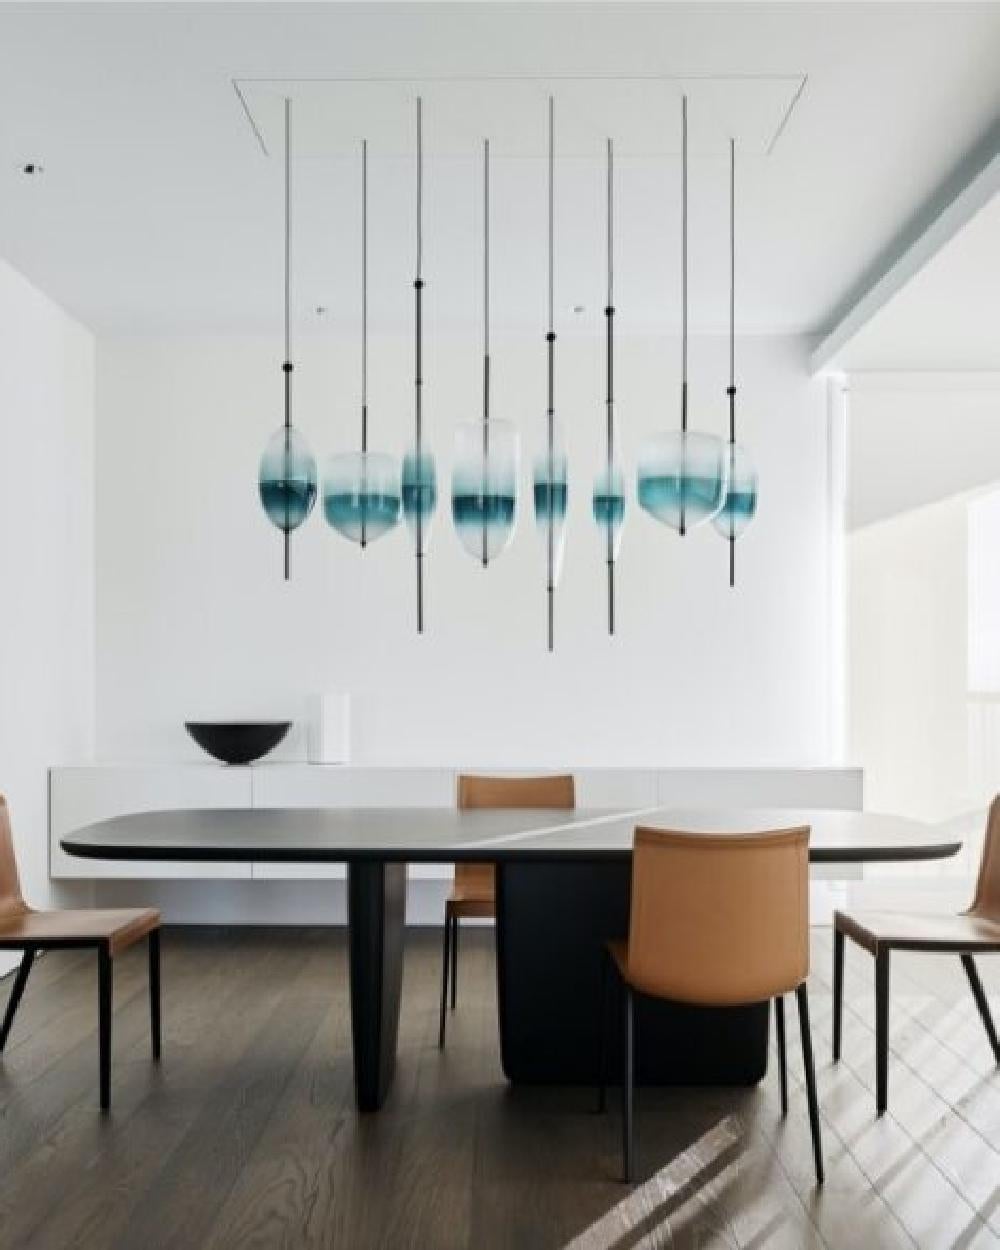 Metal FLOW[T] S5 Pendant lamp in Turquoise by Nao Tamura for Wonderglass For Sale